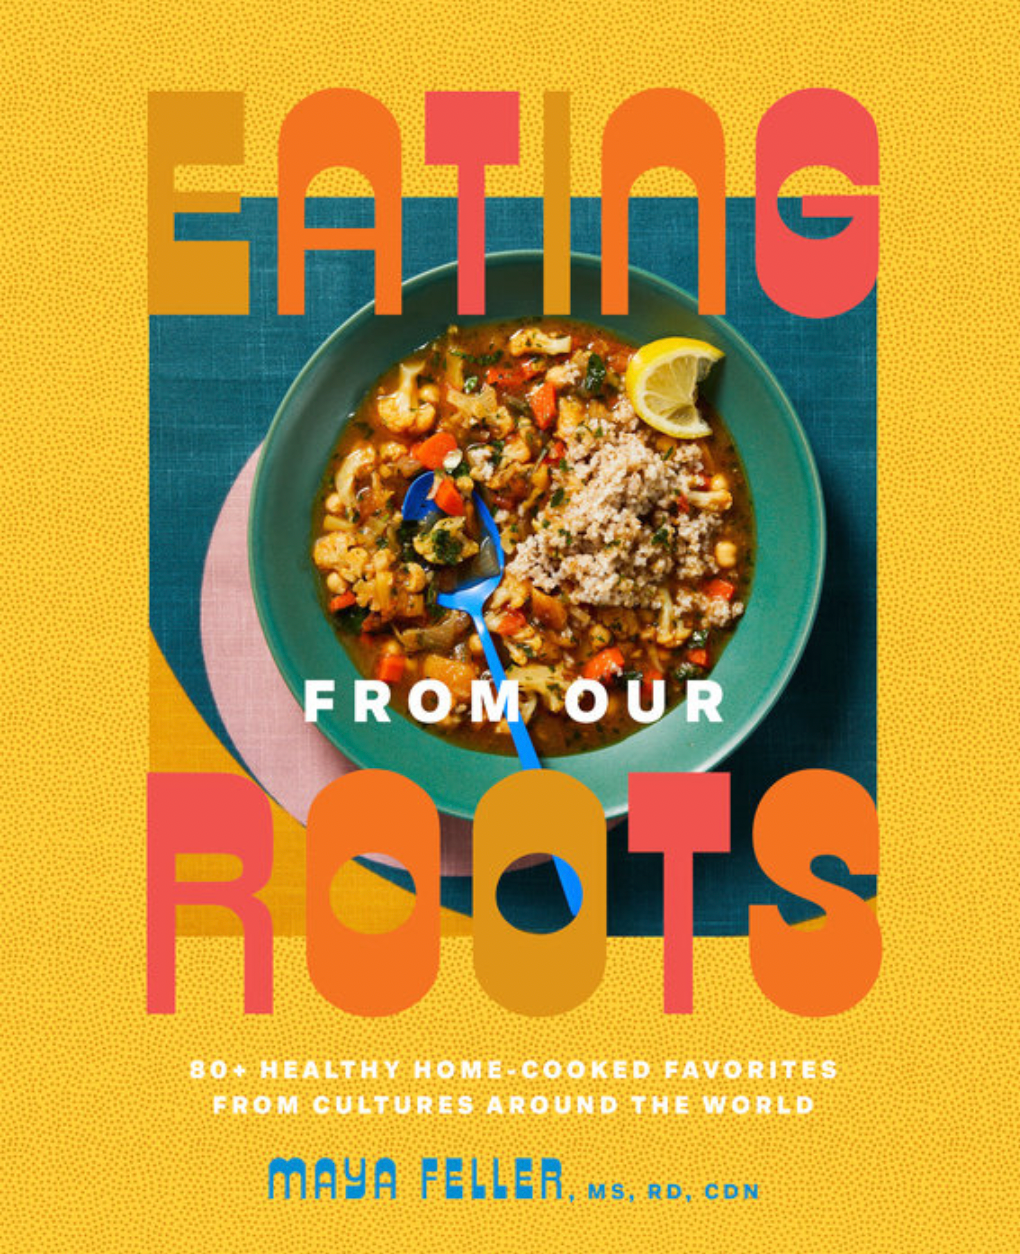 Eating From Our Roots by Maya Feller, MS, RD, CDN